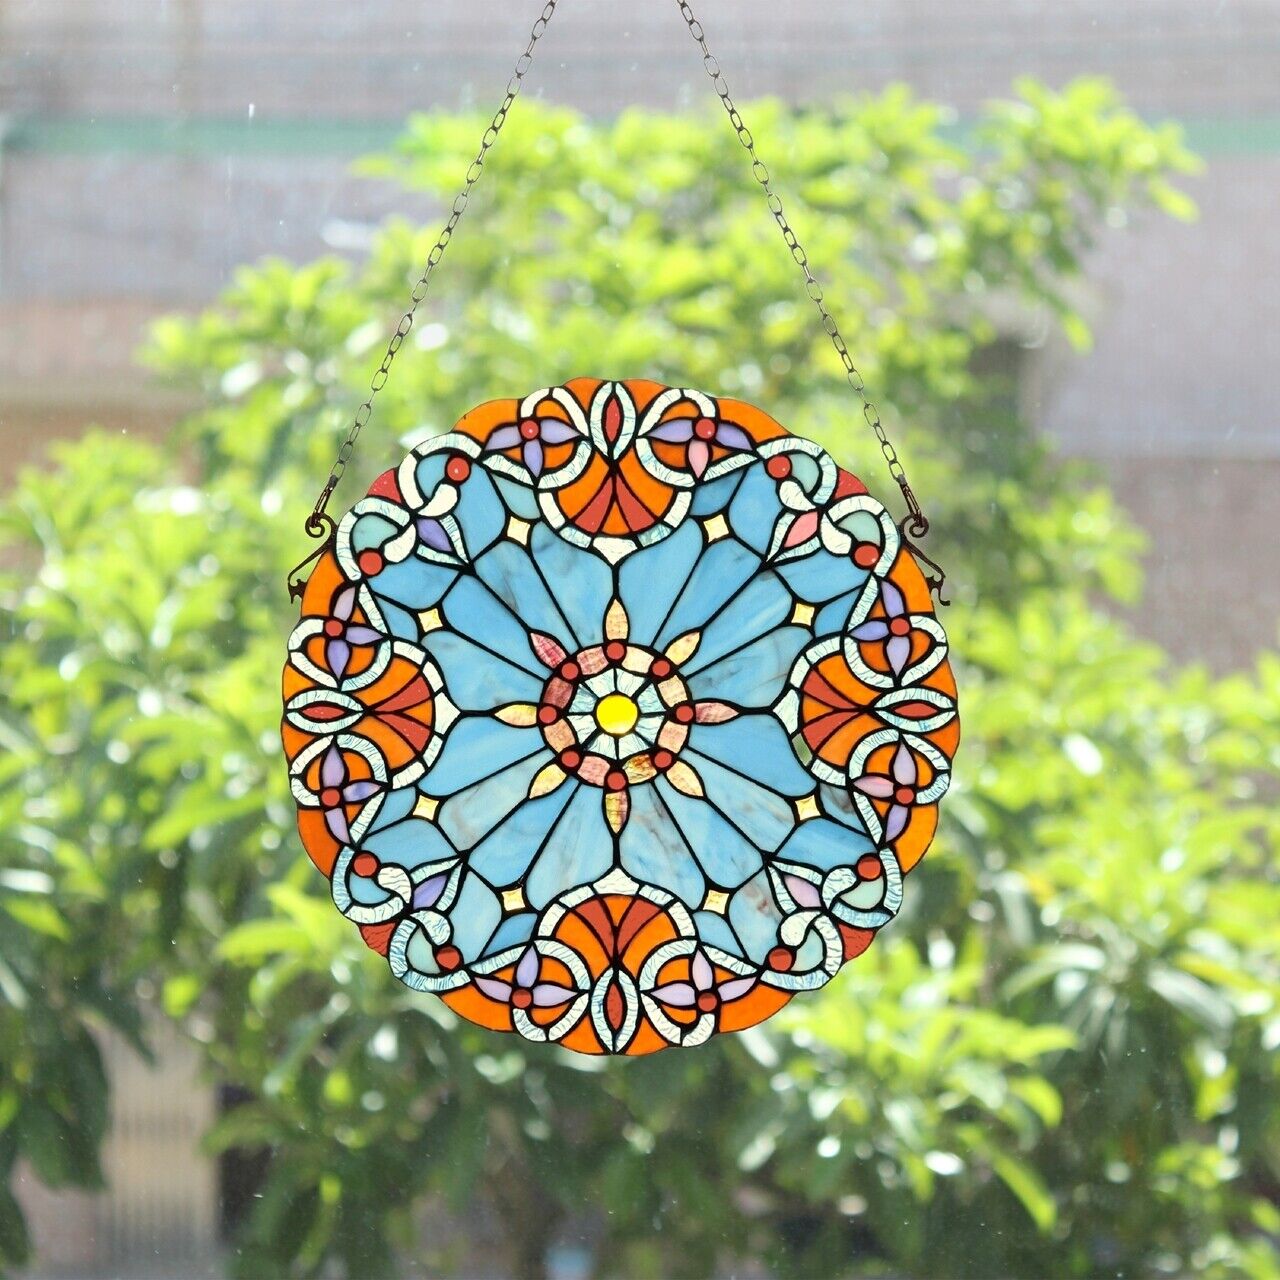 Antique Vintage Style 20" Round Stained Glass Window Hanging Panel Suncatcher